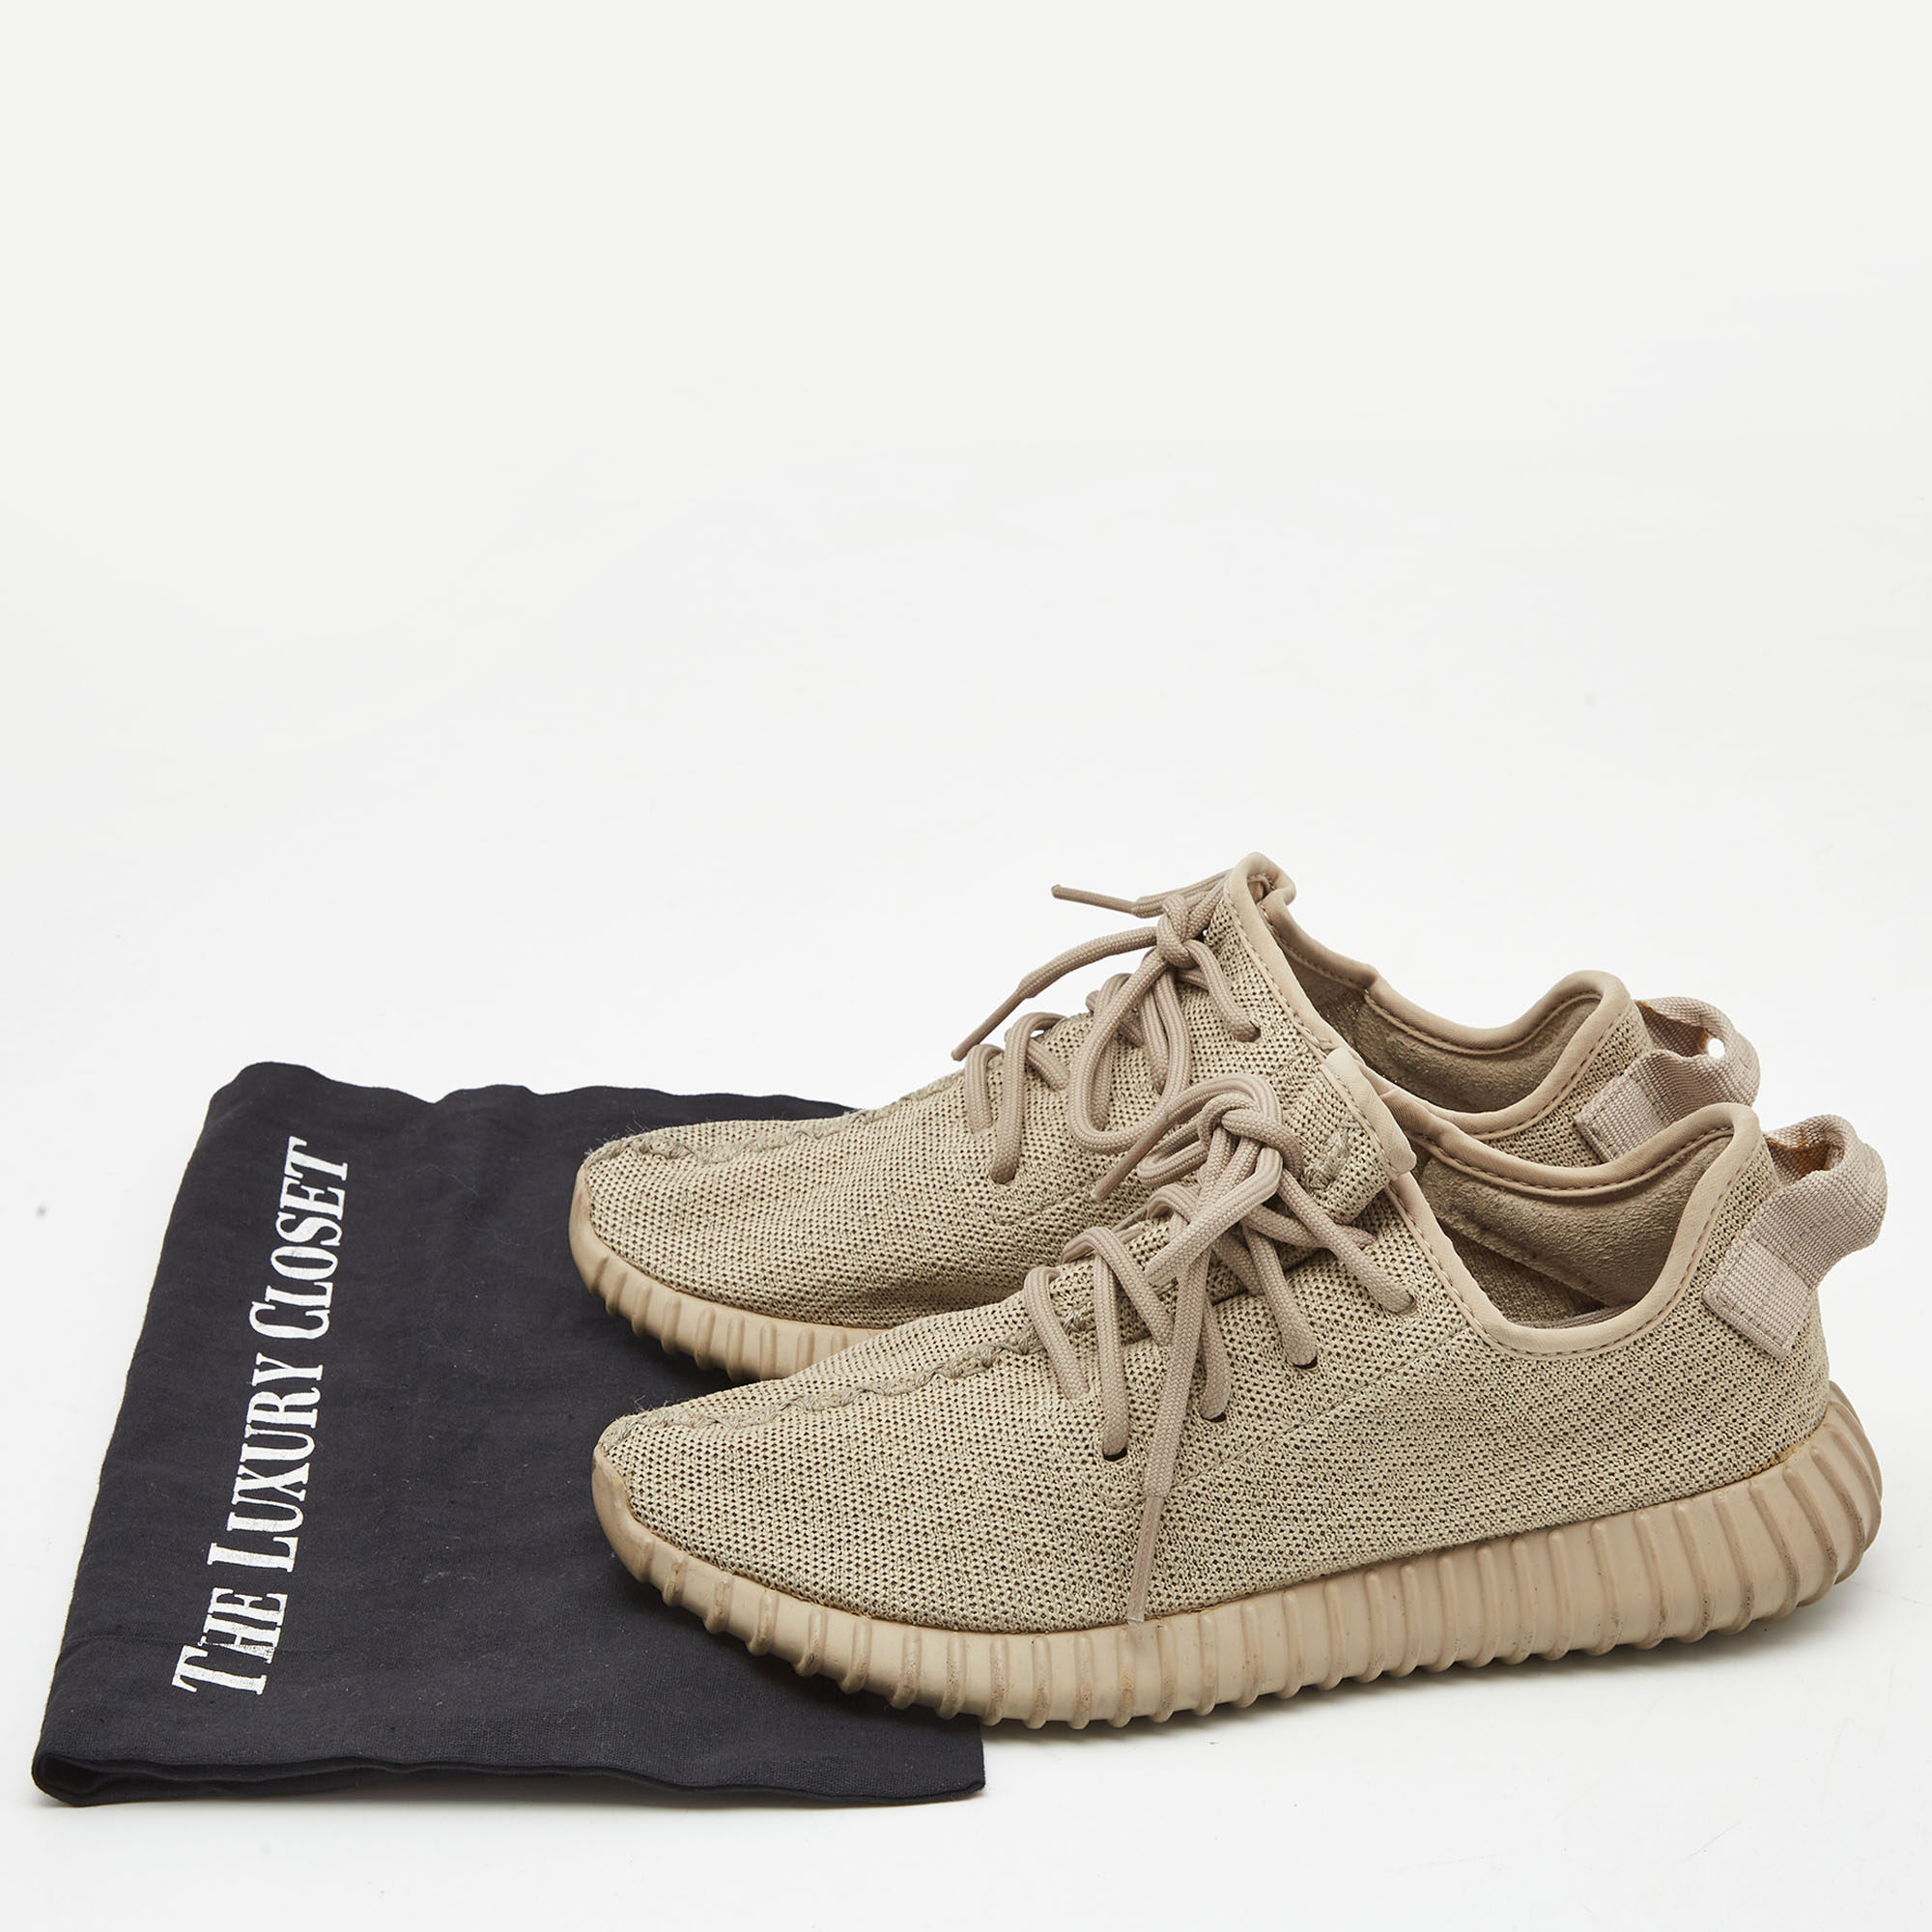 Yeezy X Adidas Beige Knit Fabric Boost 350 V2 Oxford Tan Sneakers Size 39 1/3